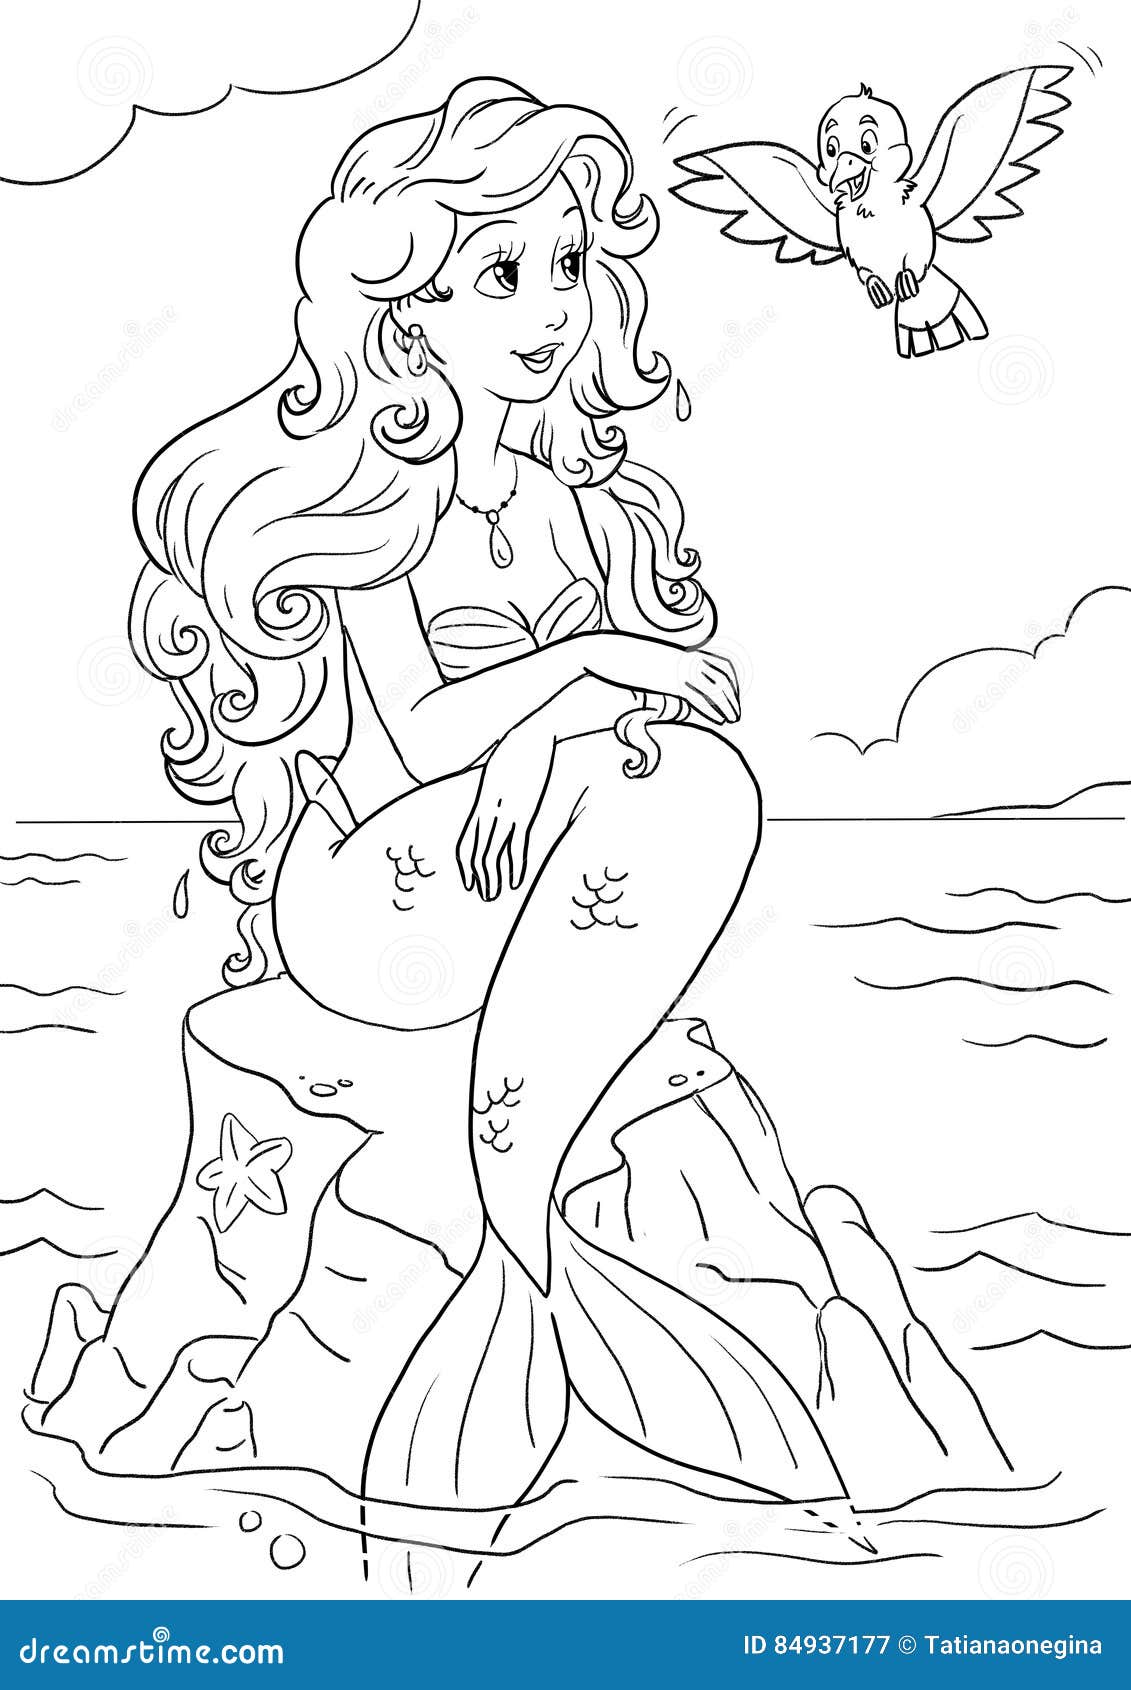 litter mermaid coloring page